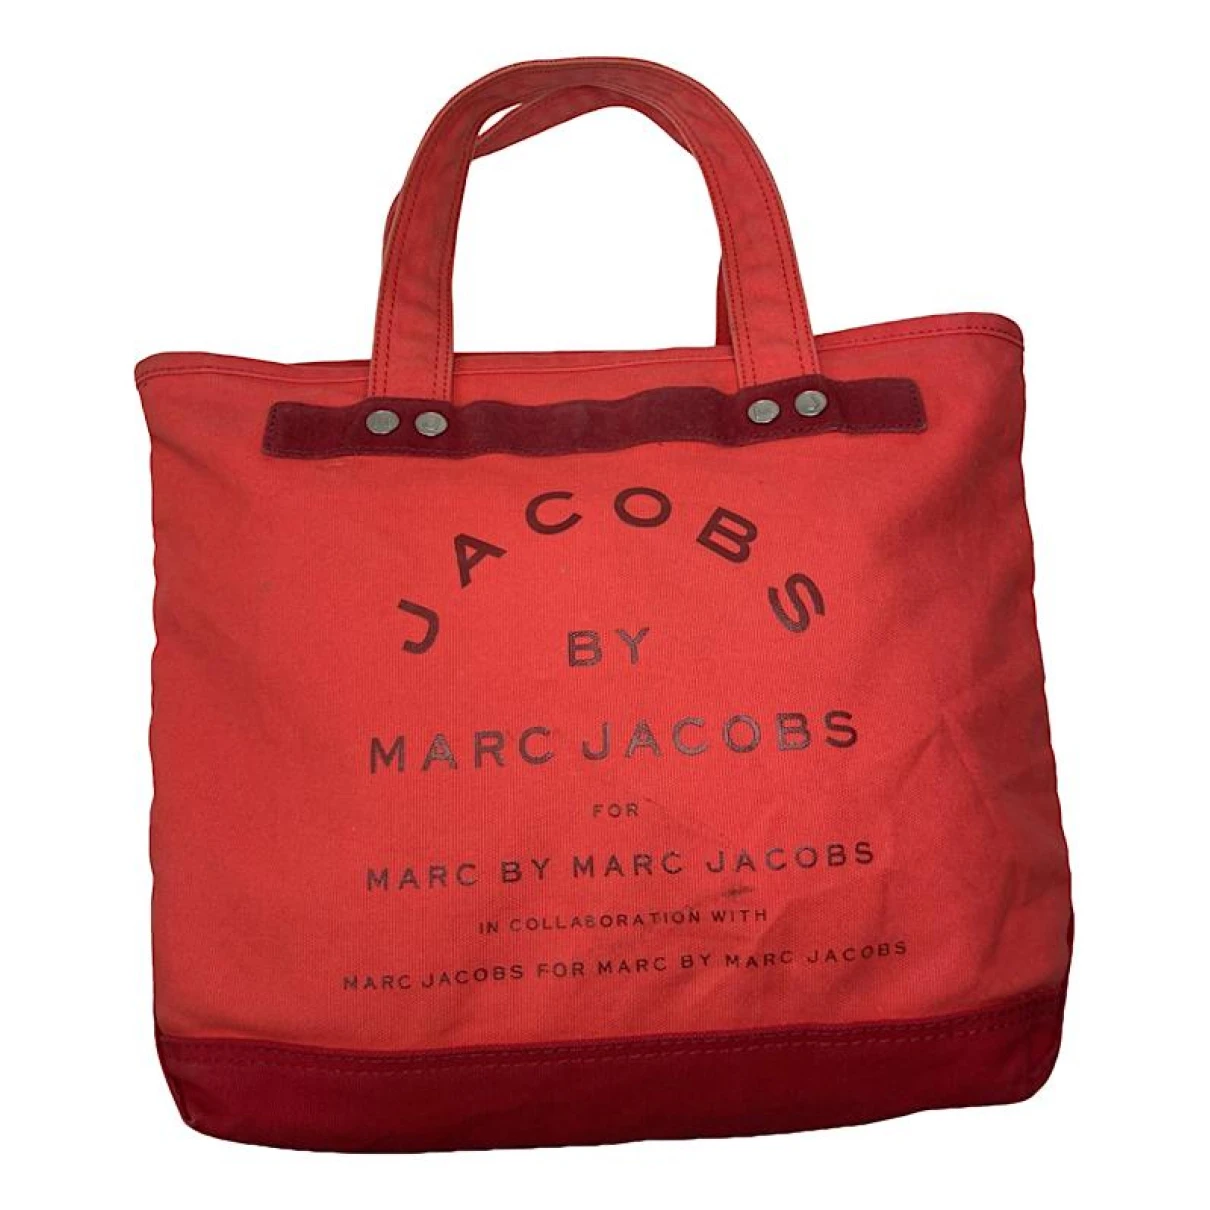 bags Marc Jacobs handbags The Tag Tote for Female Cotton. Used condition